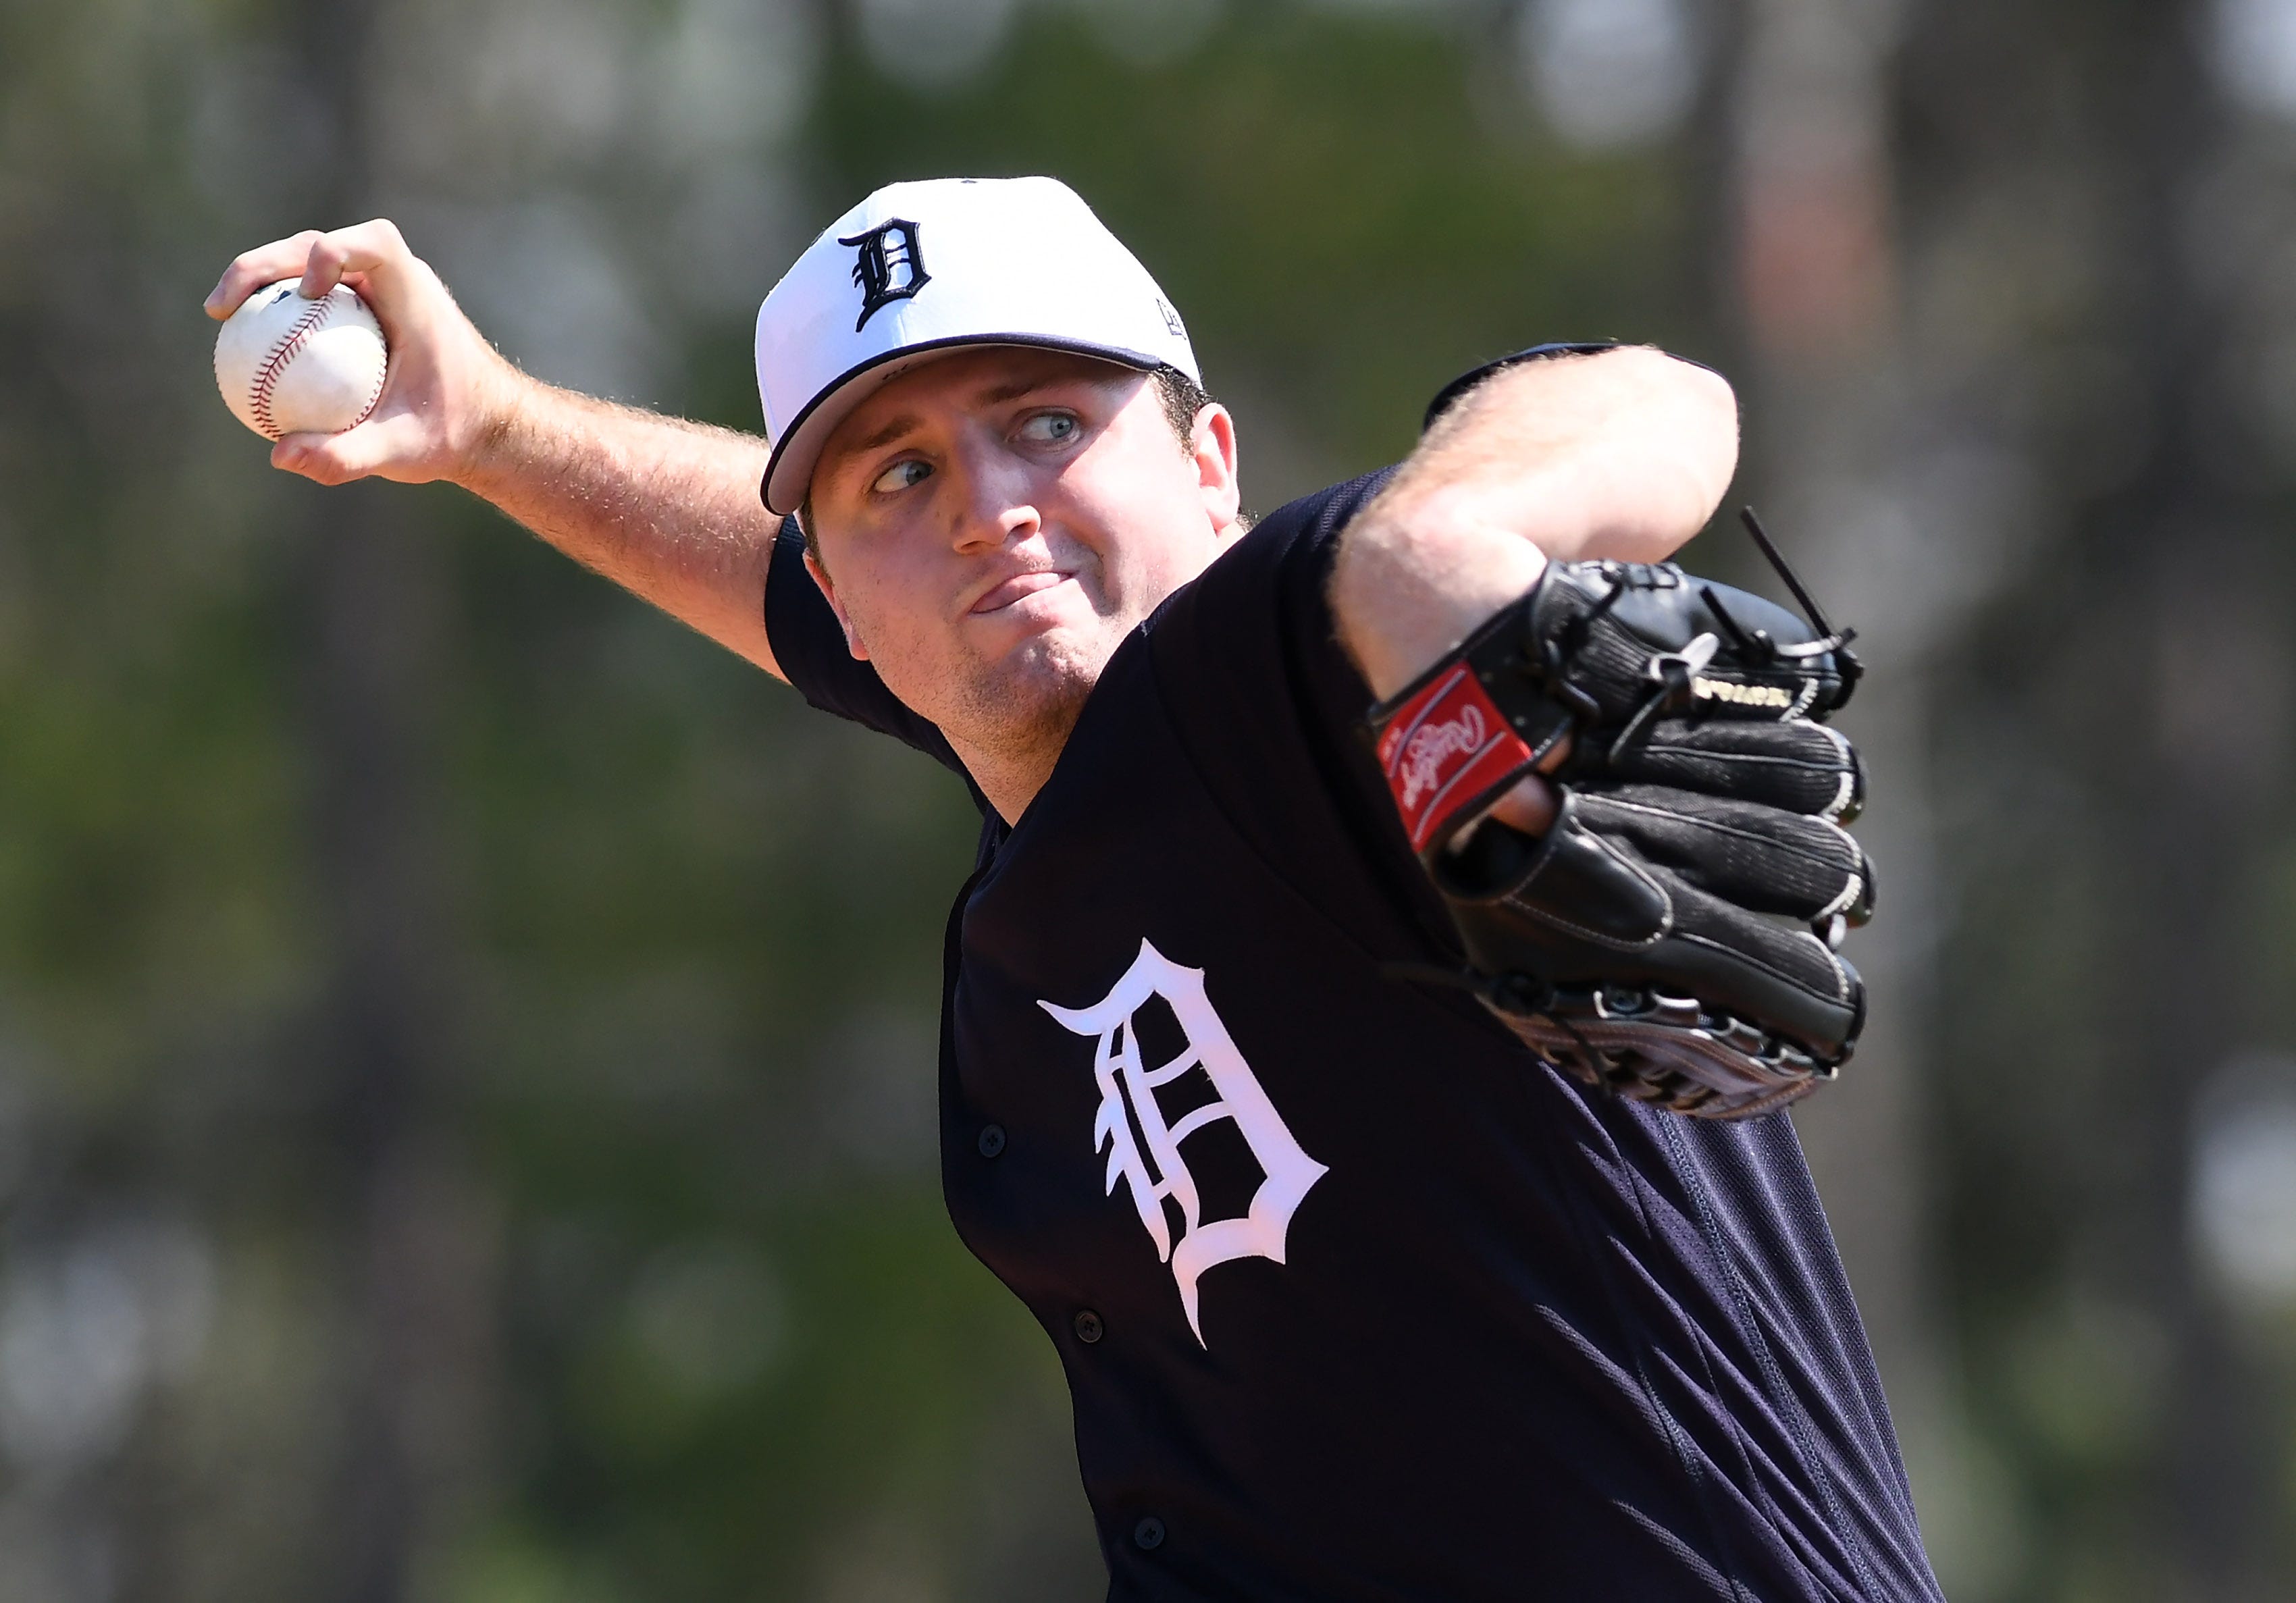 Go through the gallery to view The Detroit News list of top 20 Detroit Tigers prospects, compiled by Lynn Henning. The list includes right-hander Casey Mize (pictured), the No. 1 overall draft pick in 2018.